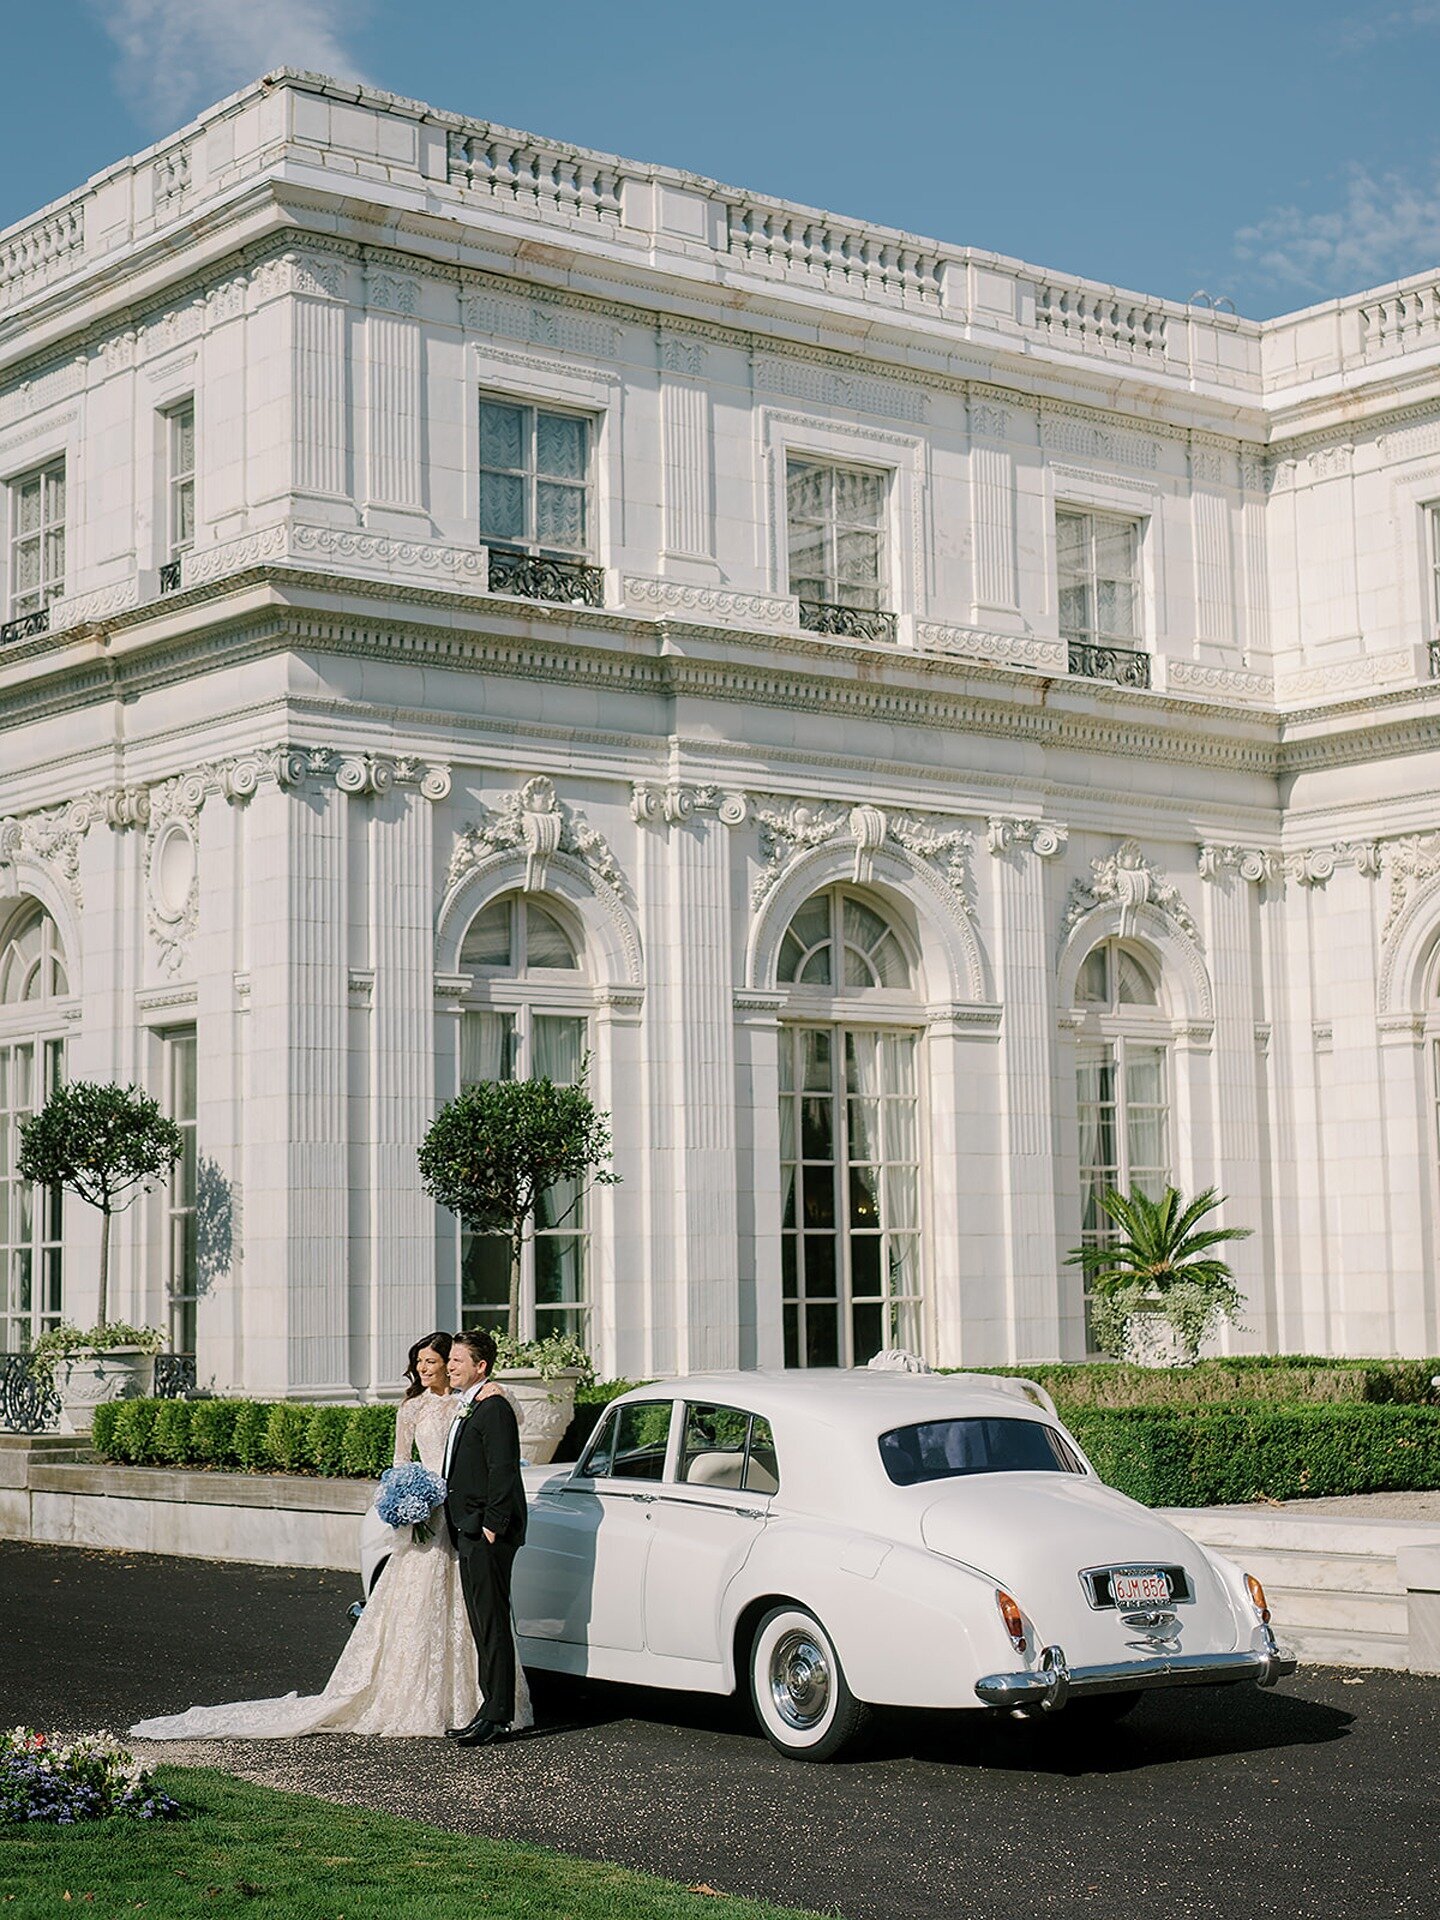 leila-james-events-newport-ri-wedding-planning-luxury-events-evie-and-mike-classic-elegance-rosecliff-mansion-stephanie-vegliante-photography-36 copy - COVER